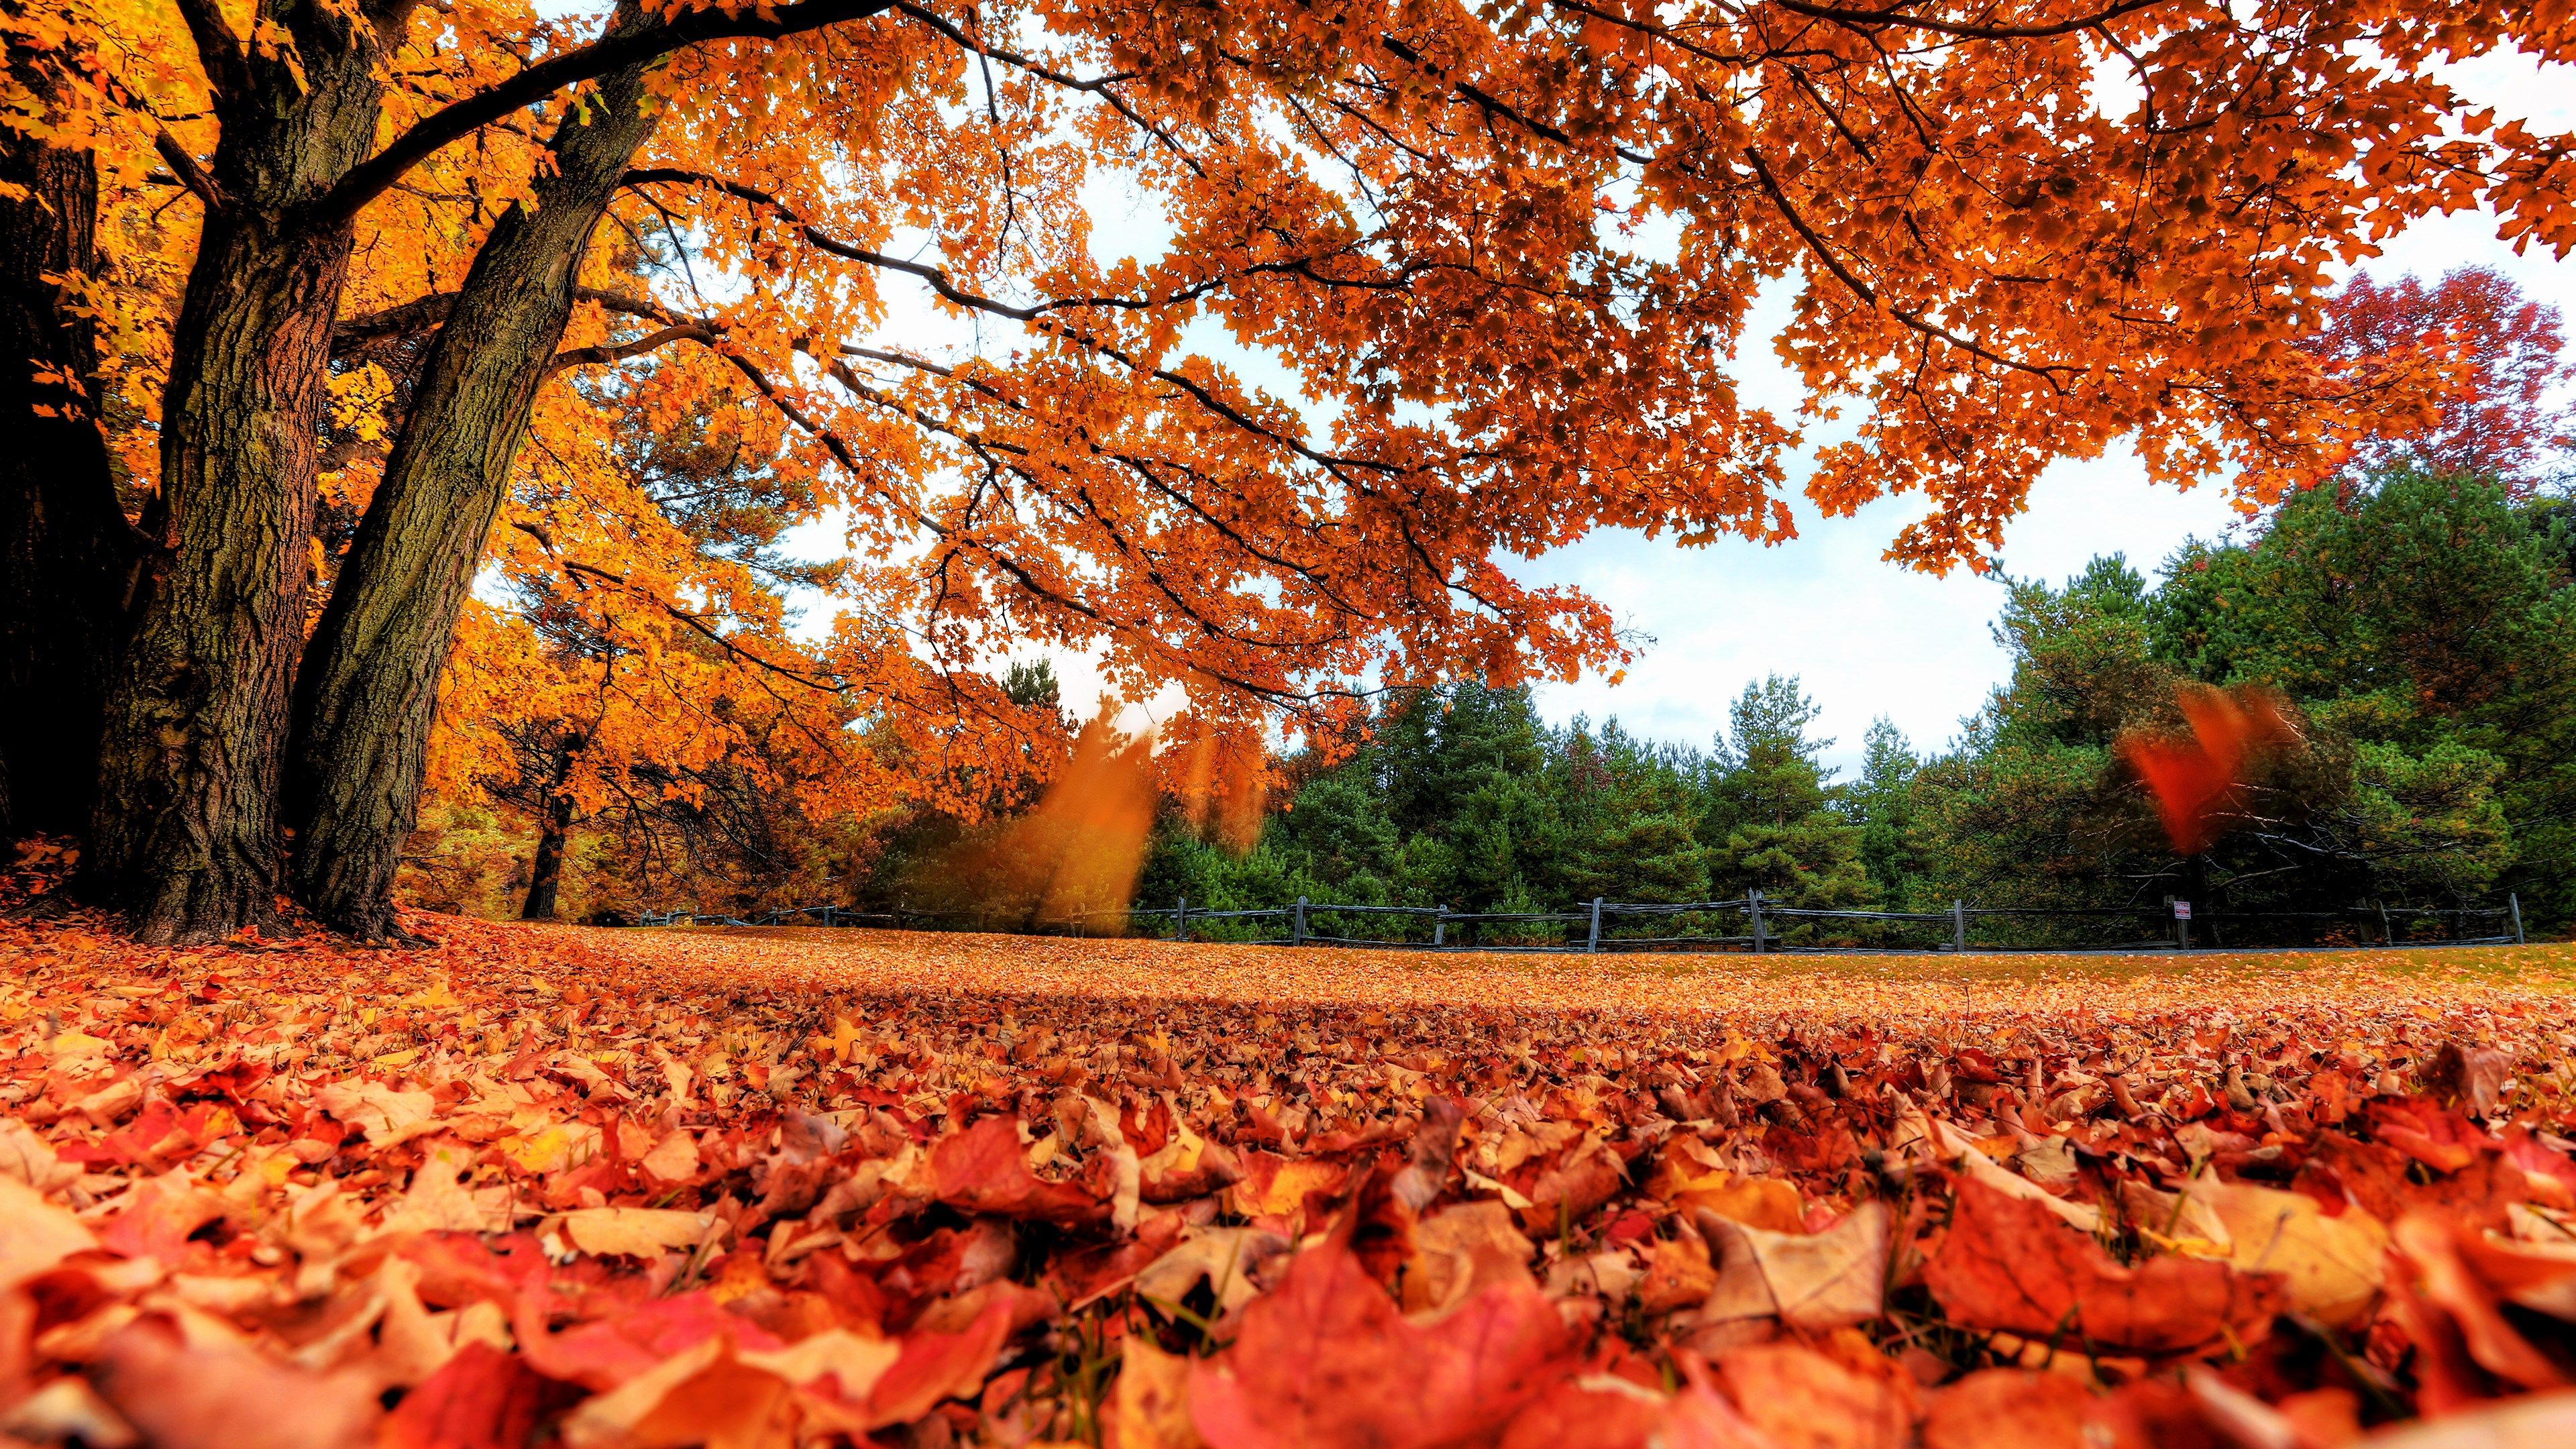 4k wallpaper download for pc (3840x2160). Autumn leaves wallpaper, Fall wallpaper, Autumn trees